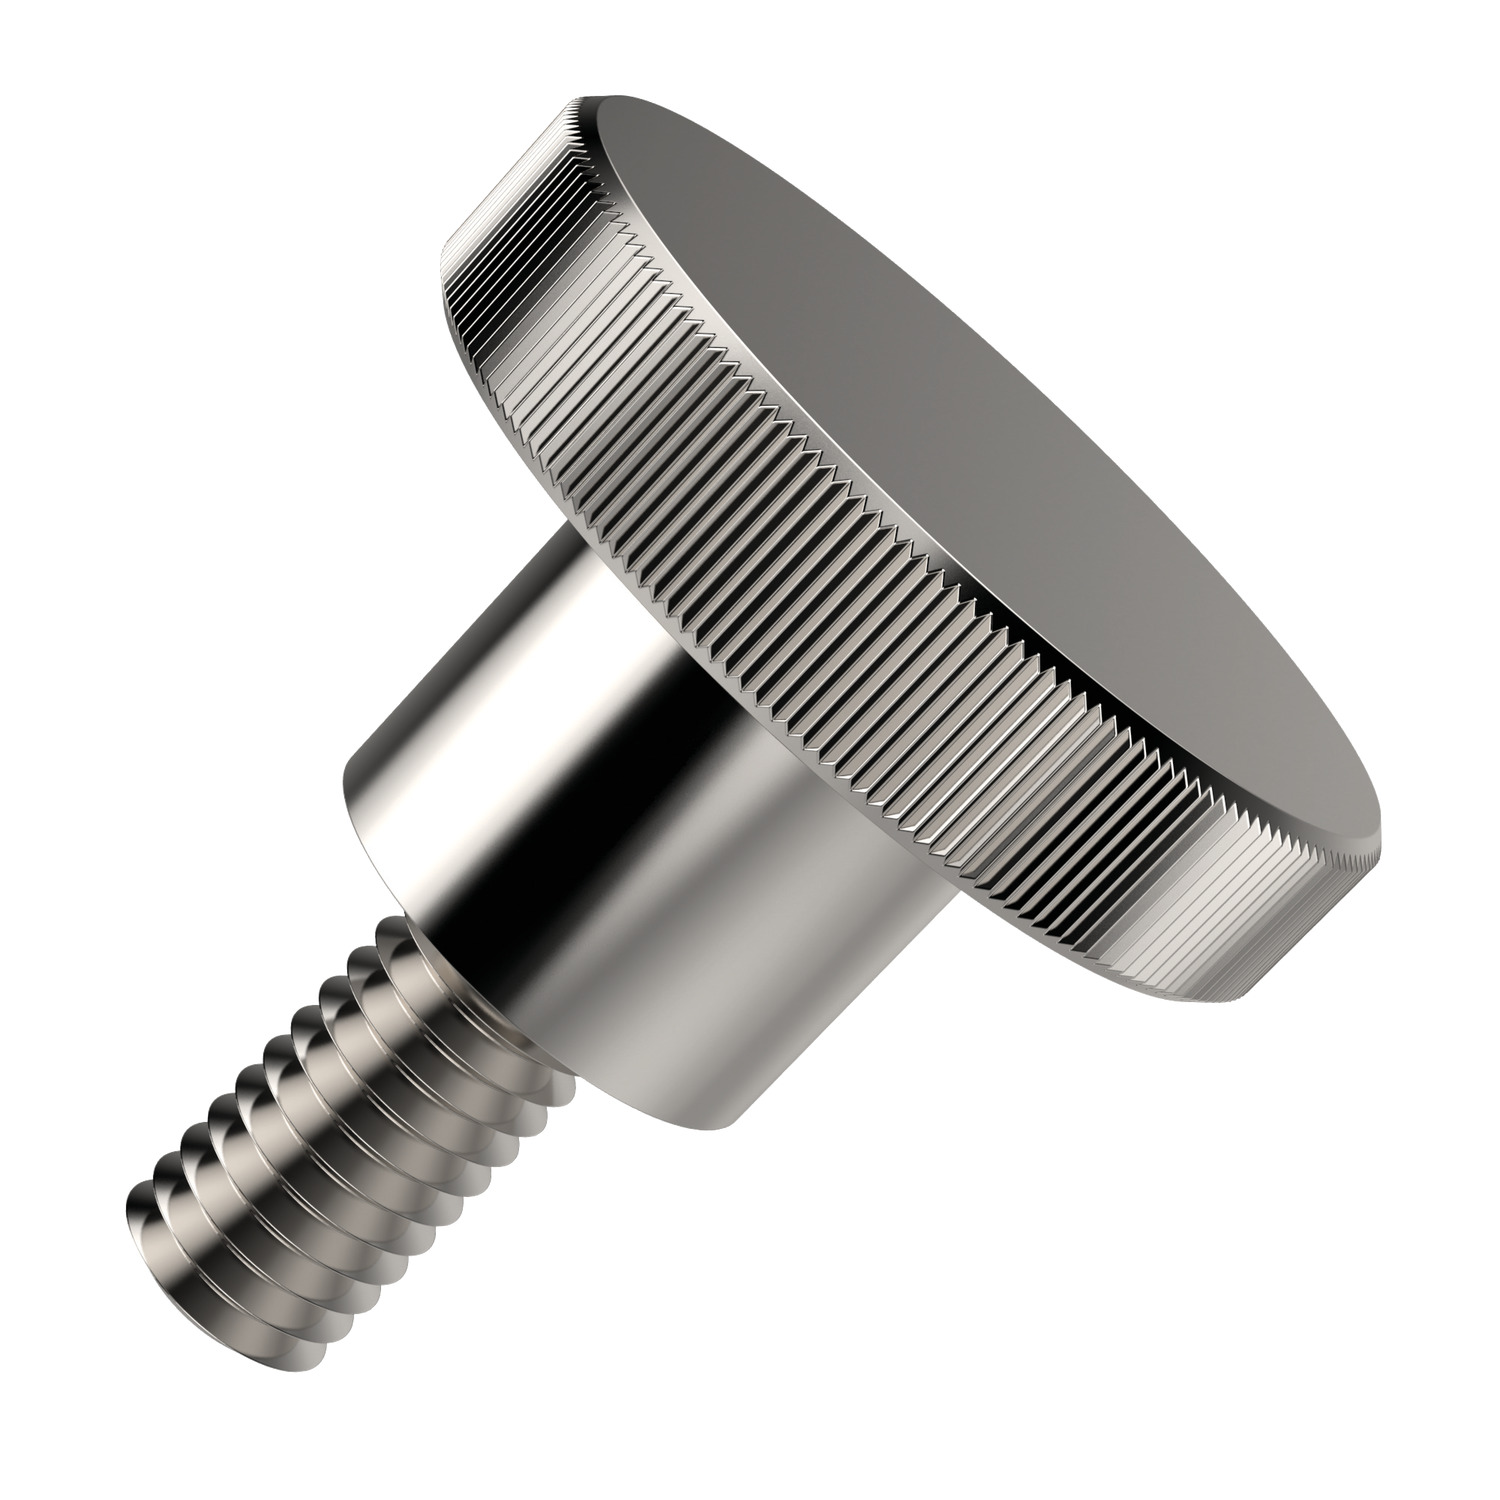 Knurled Thumb Screws Stainless Steel Thumb Screw to DIN 464.